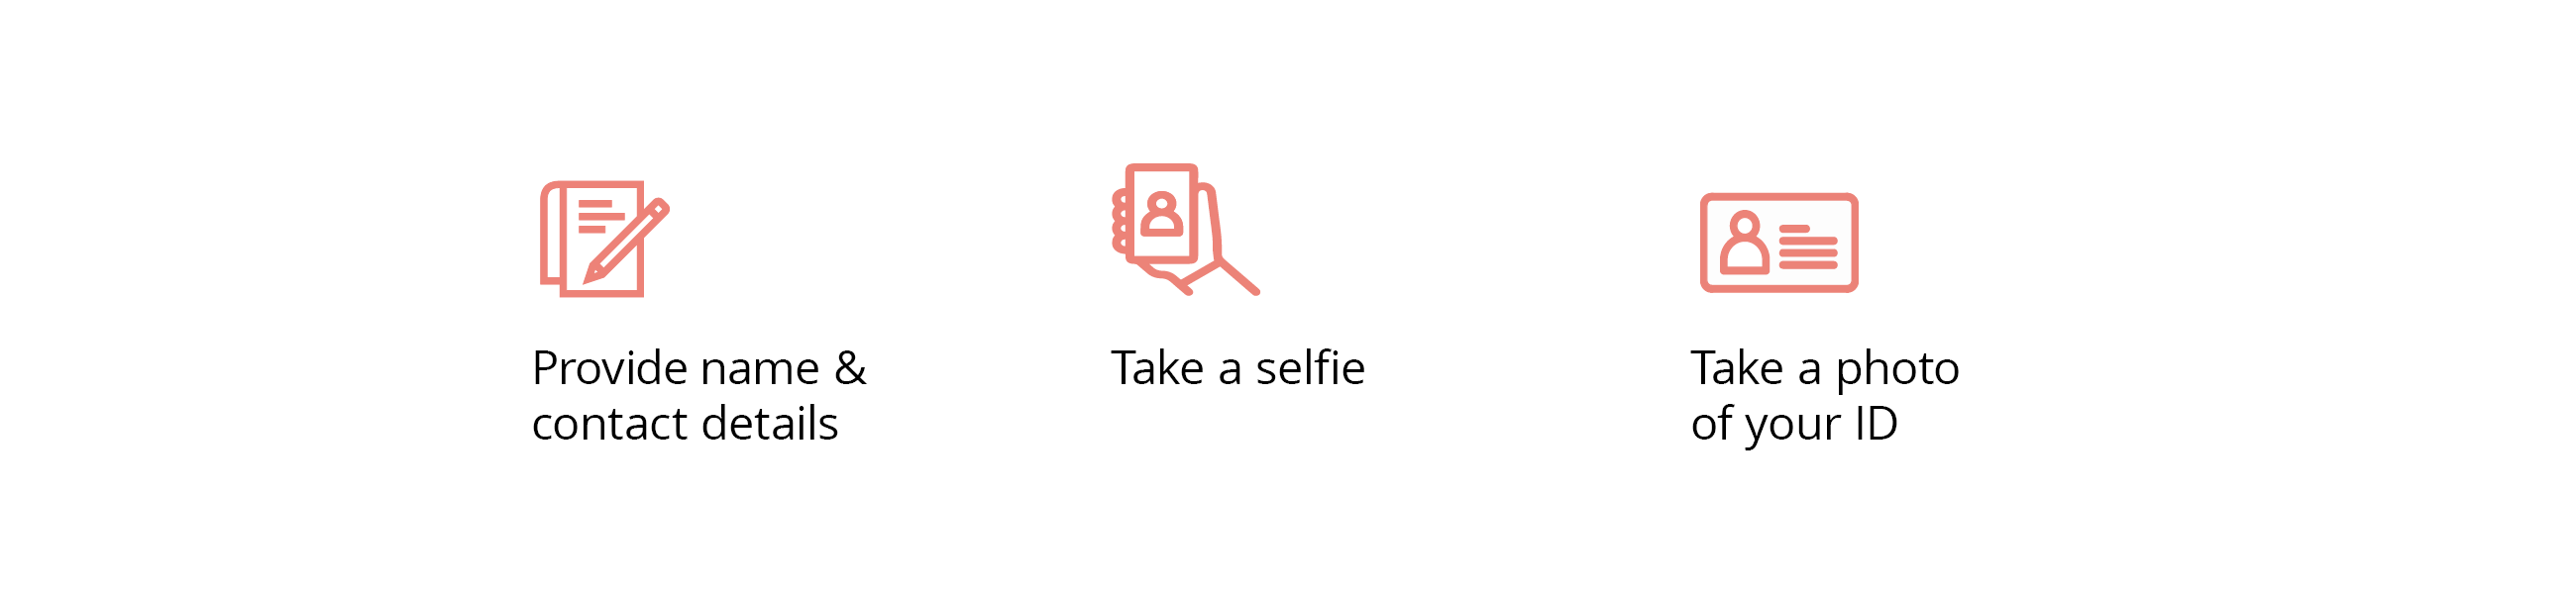 Provide name & contact details, Take a selfie, Take a photo of your ID